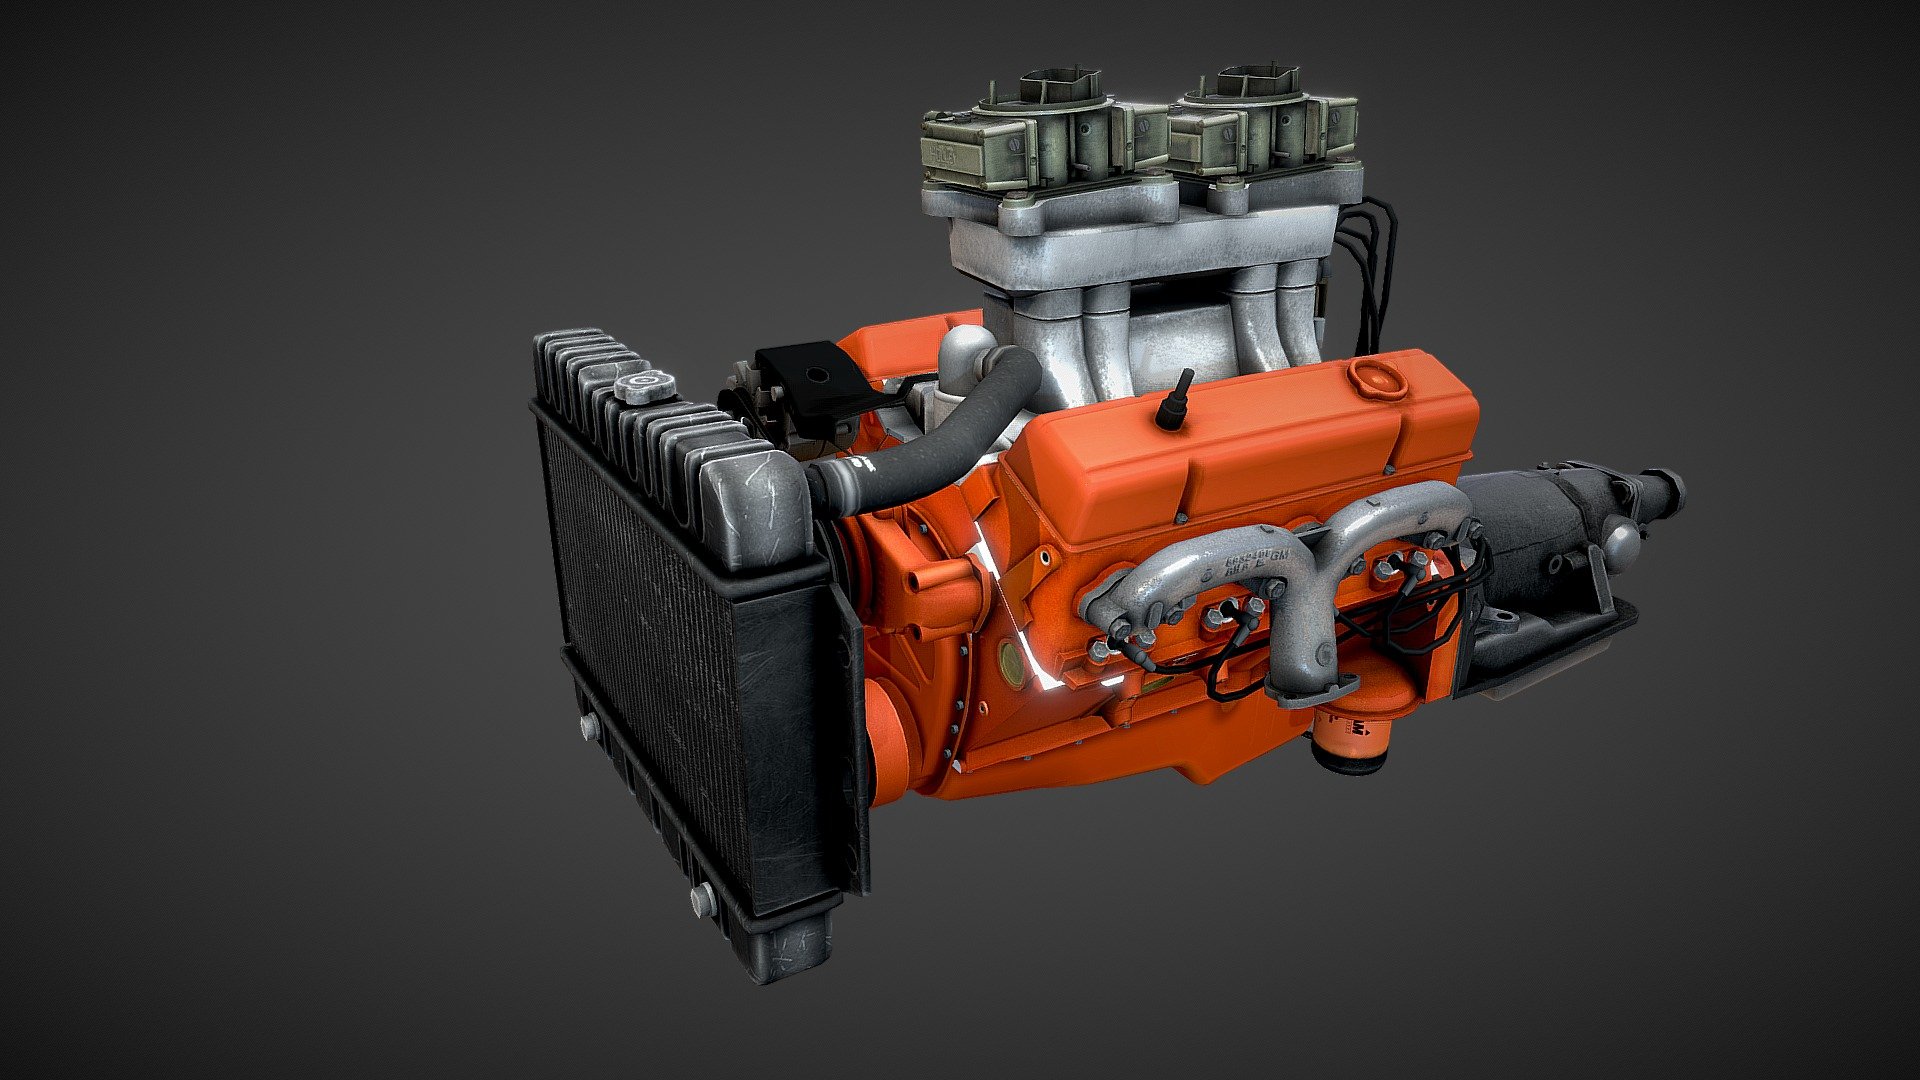 High accuracy V8 engine model, full textured.
Game-ready lowpoly geometry.

Parts list :
1-V8 small block
2-oil pan
3-oil filter
4-left head
5-left head cover
6-left head header
7-right head
8-right head cover
9-right head header
10-dualquad manifold intake
11-holley carburetors
12-fuel pomp
13-water pomp
14-alternator
15-timing cover
16-timing chain and gear set
17-ignition distributor
18-drive pulley
19-air cleaner
20-transmission
21-clutch
22-torque converter - V8 Small Block - Buy Royalty Free 3D model by Veaceslav Condraciuc (@FLED) 3d model